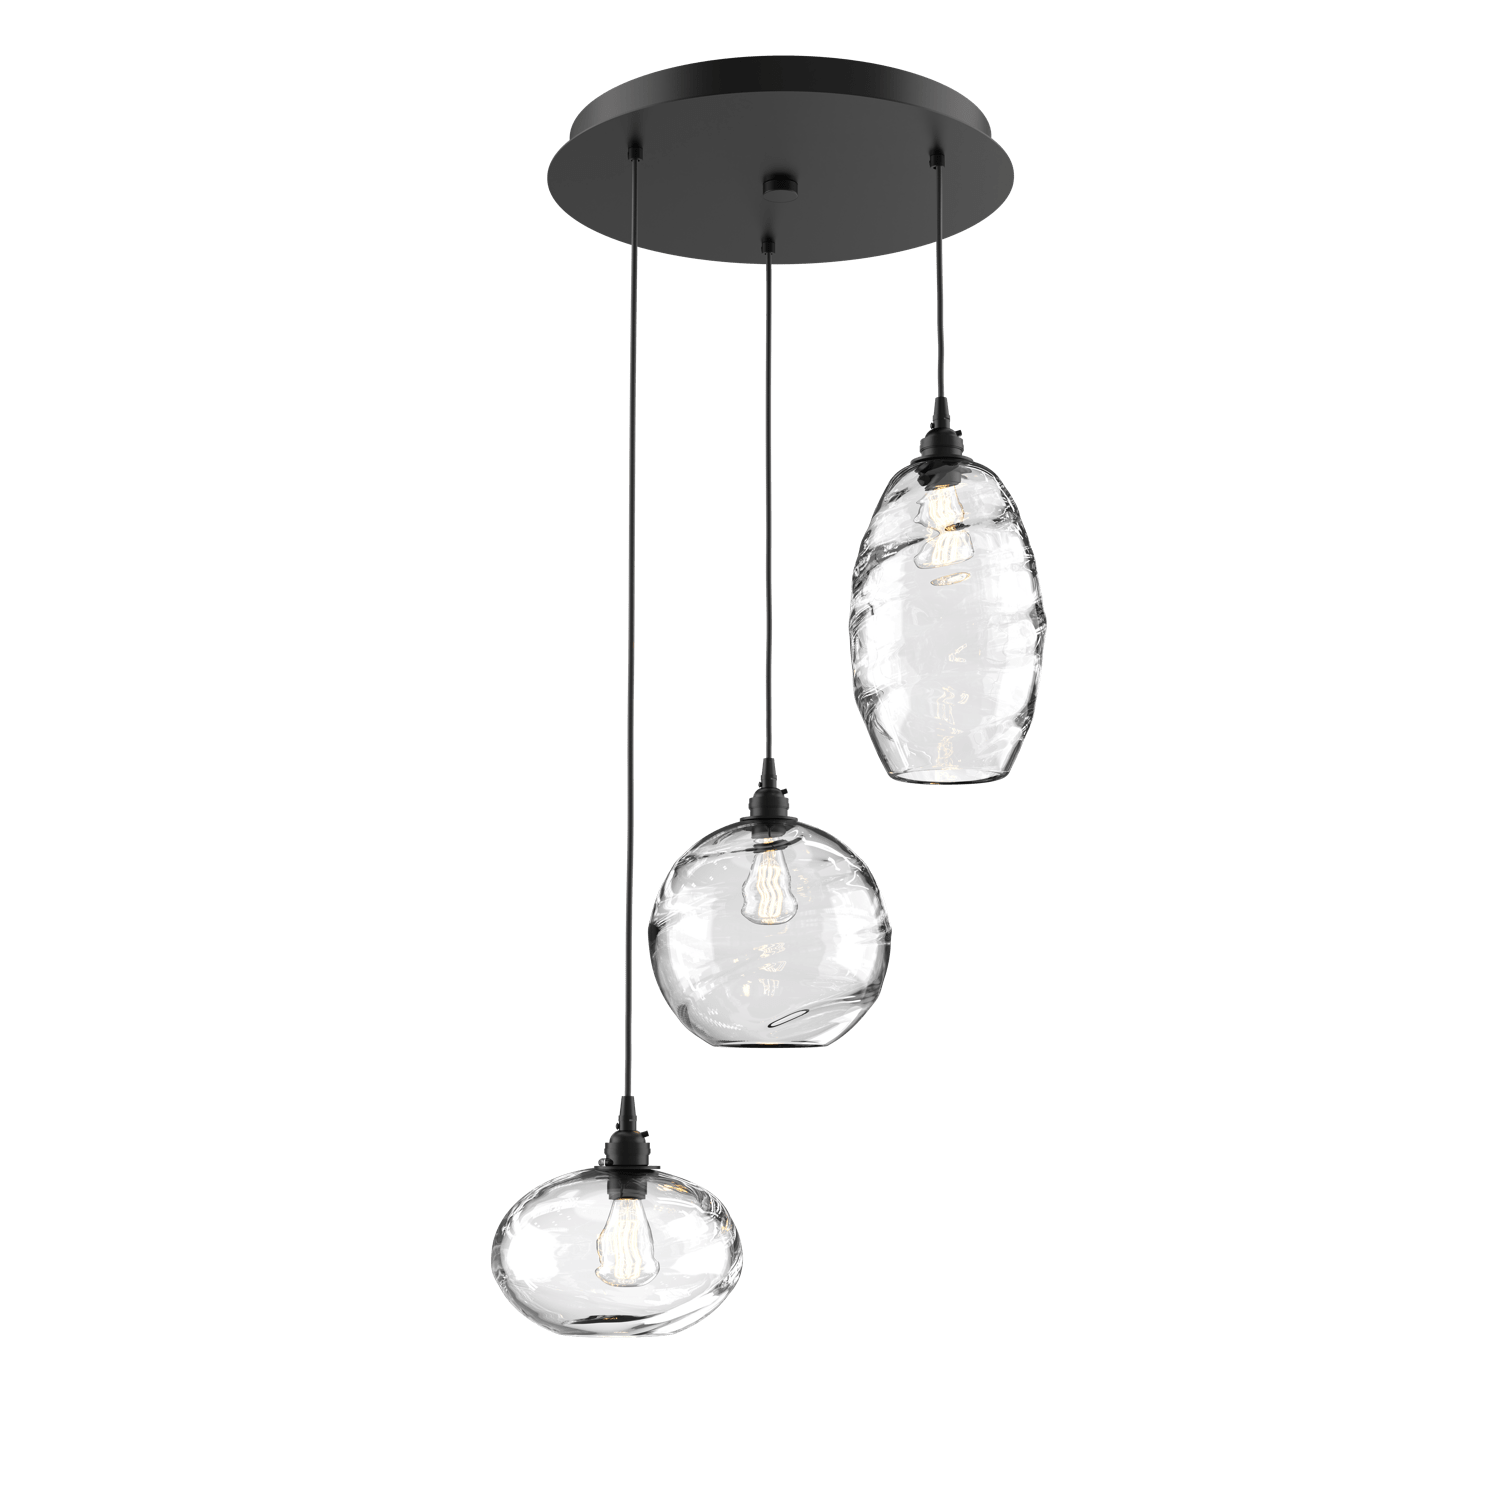 CHB0048-03-MB-OC-Hammerton-Studio-Optic-Blown-Glass-Misto-3-light-round-pendant-chandelier-with-matte-black-finish-and-optic-clear-blown-glass-shades-and-incandescent-lamping